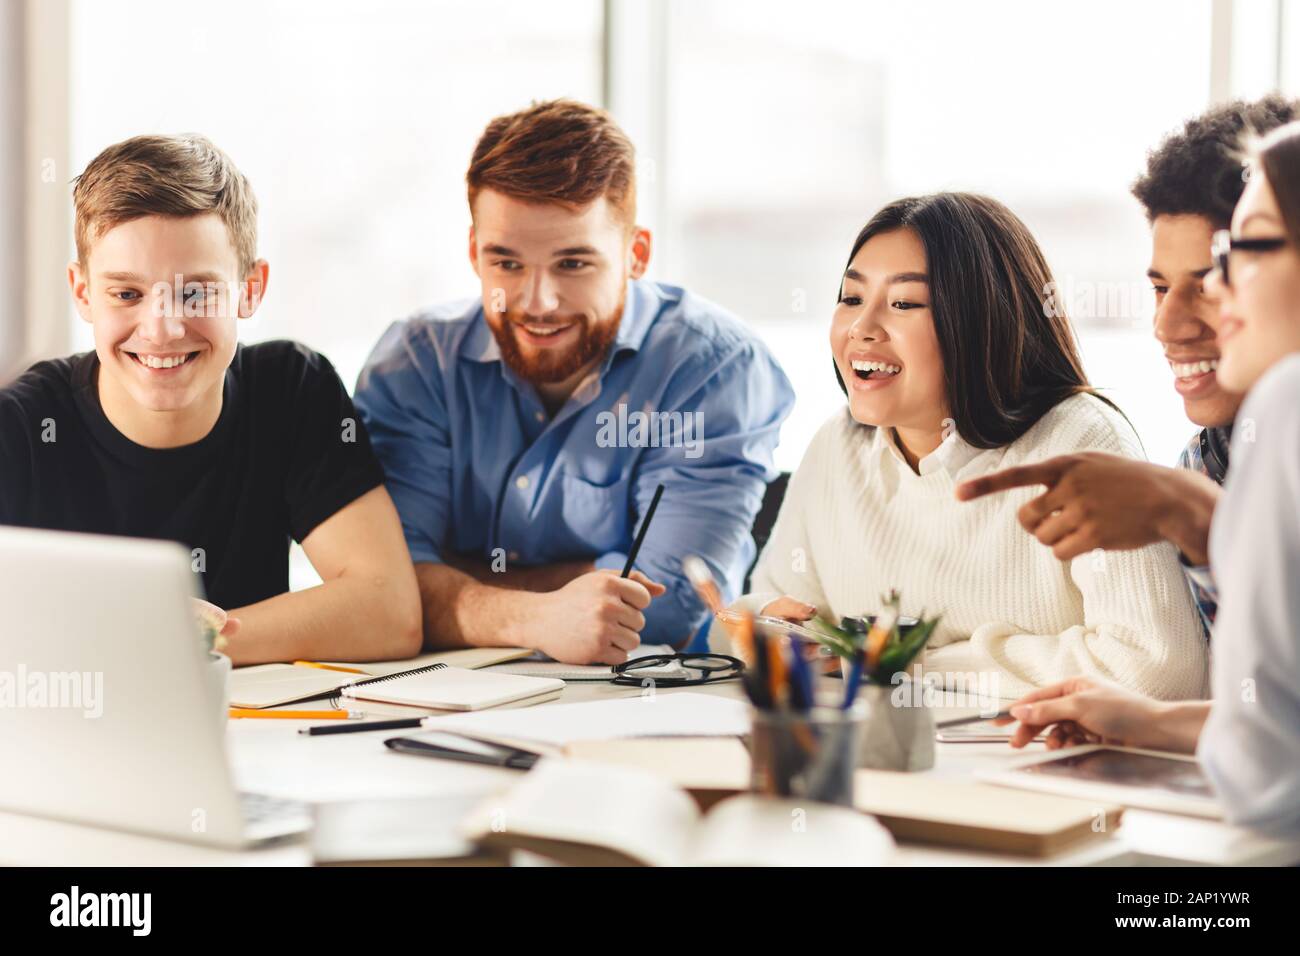 Team of college students talking over group project Stock Photo